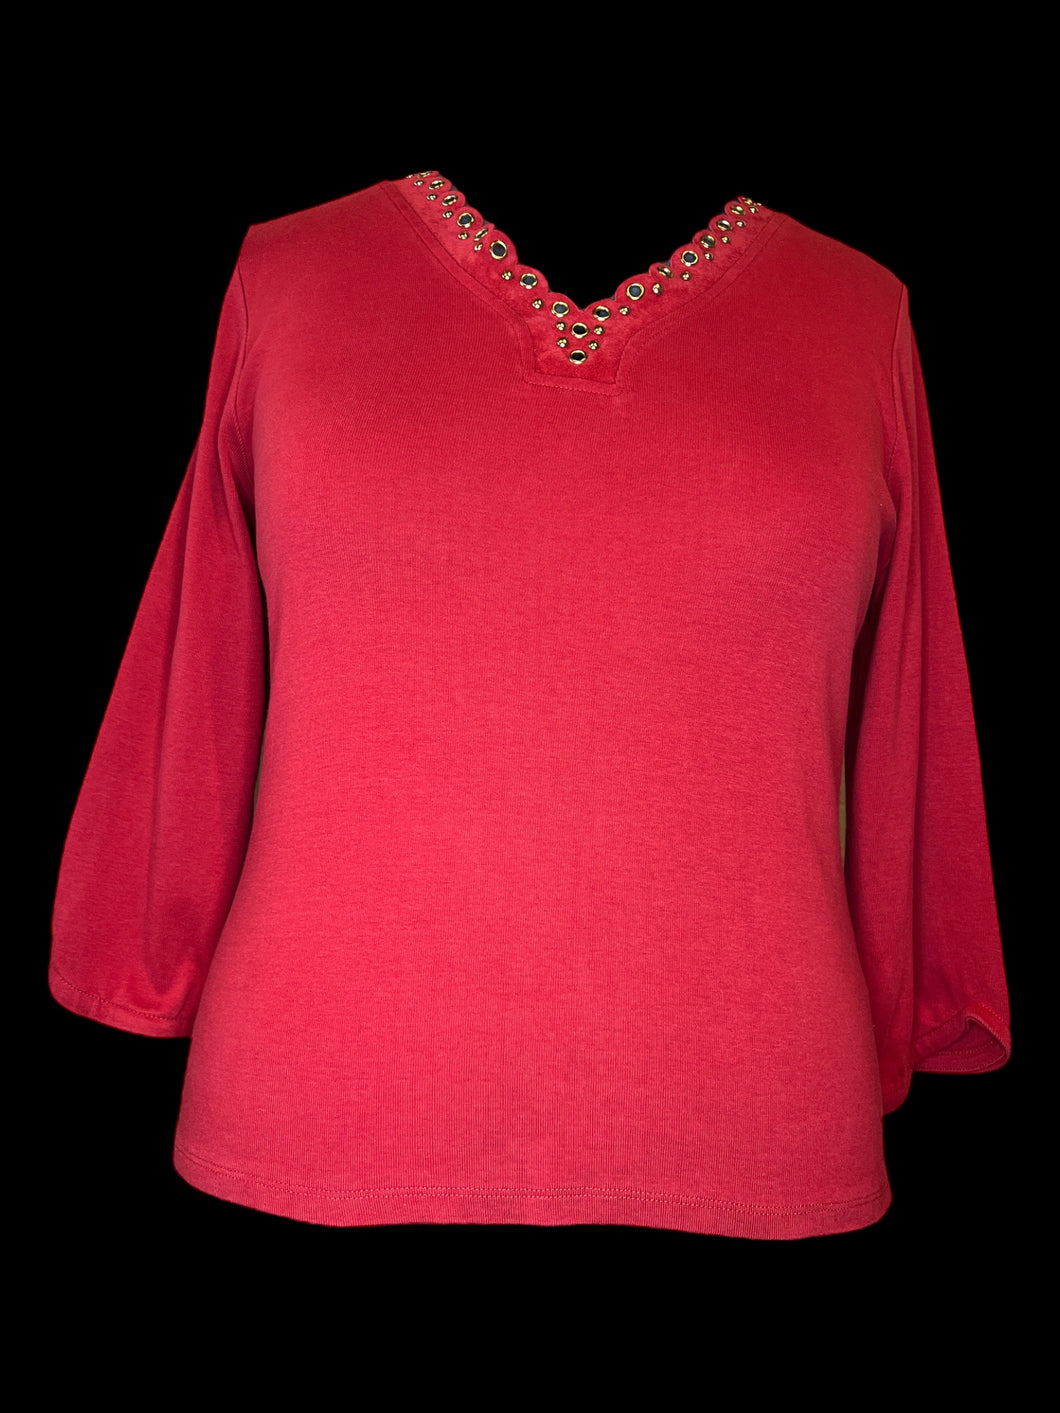 2X Red long sleeve cotton top w/ faux suede scallop neckline w/ gold rivets & studs